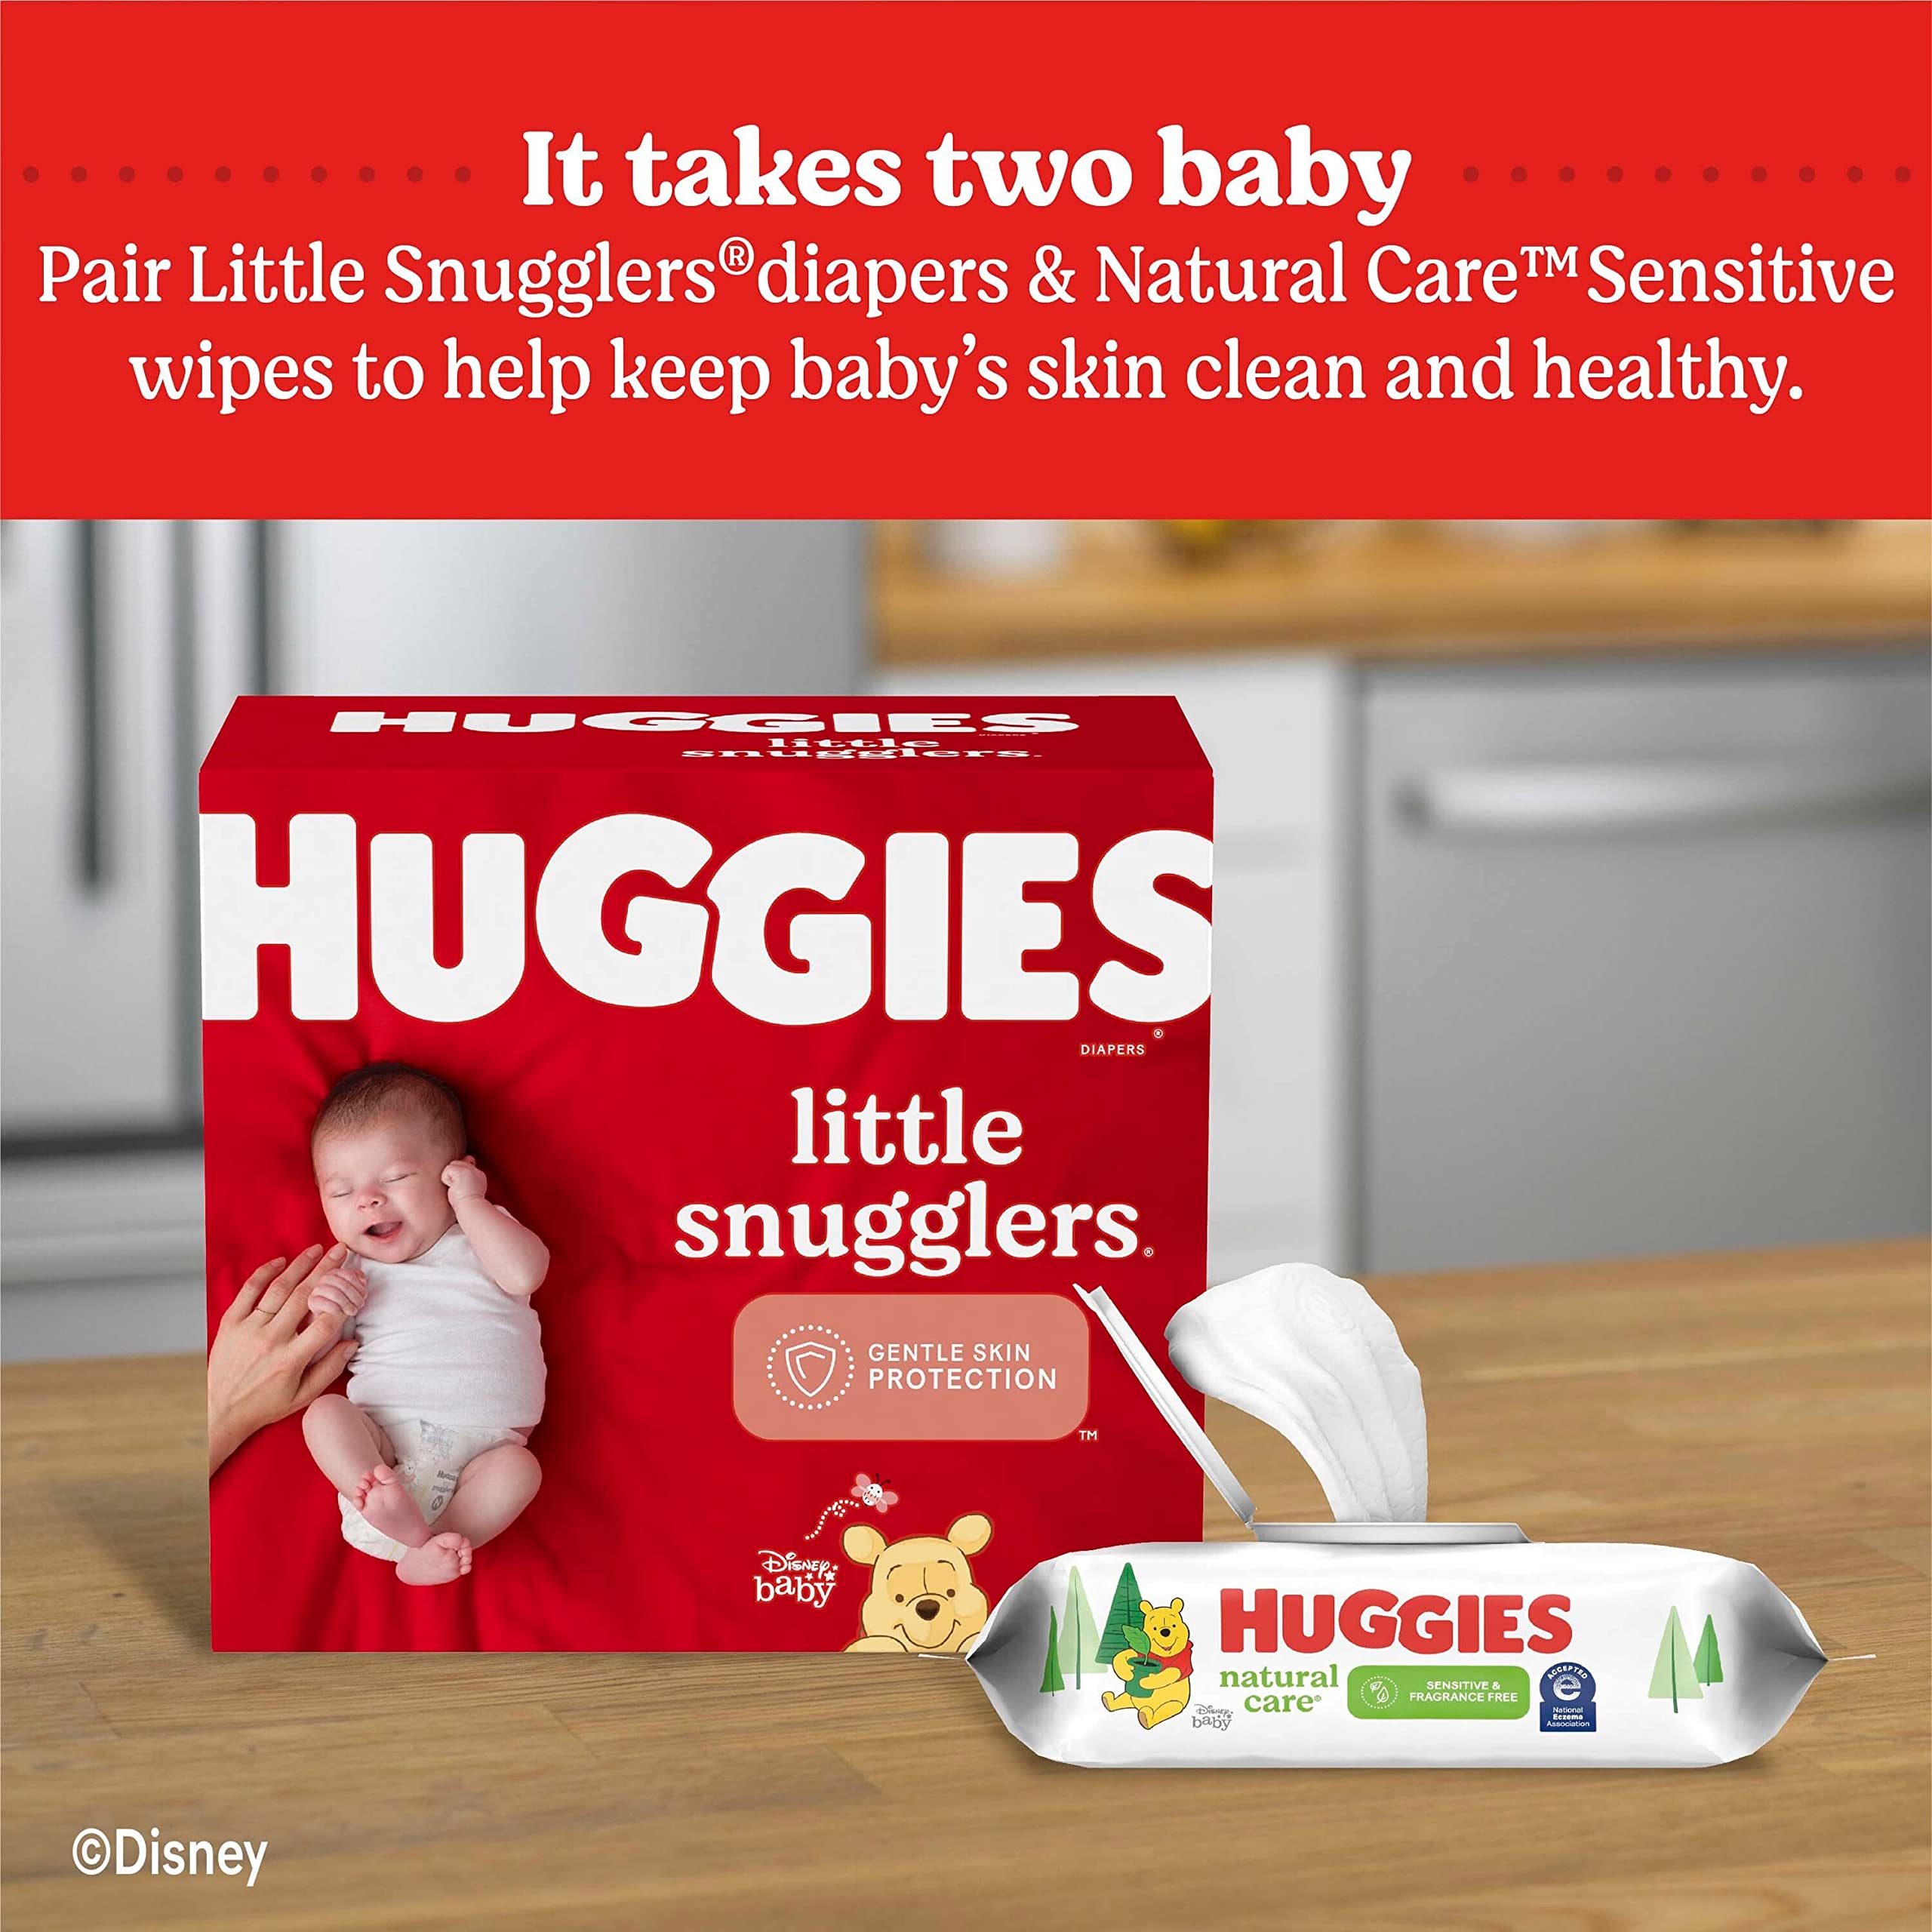 Huggies Natural Care Sensitive Baby Wipes, Unscented, Hypoallergenic, 99% Purified Water, 8 Flip-Top Packs (448 Wipes Total)